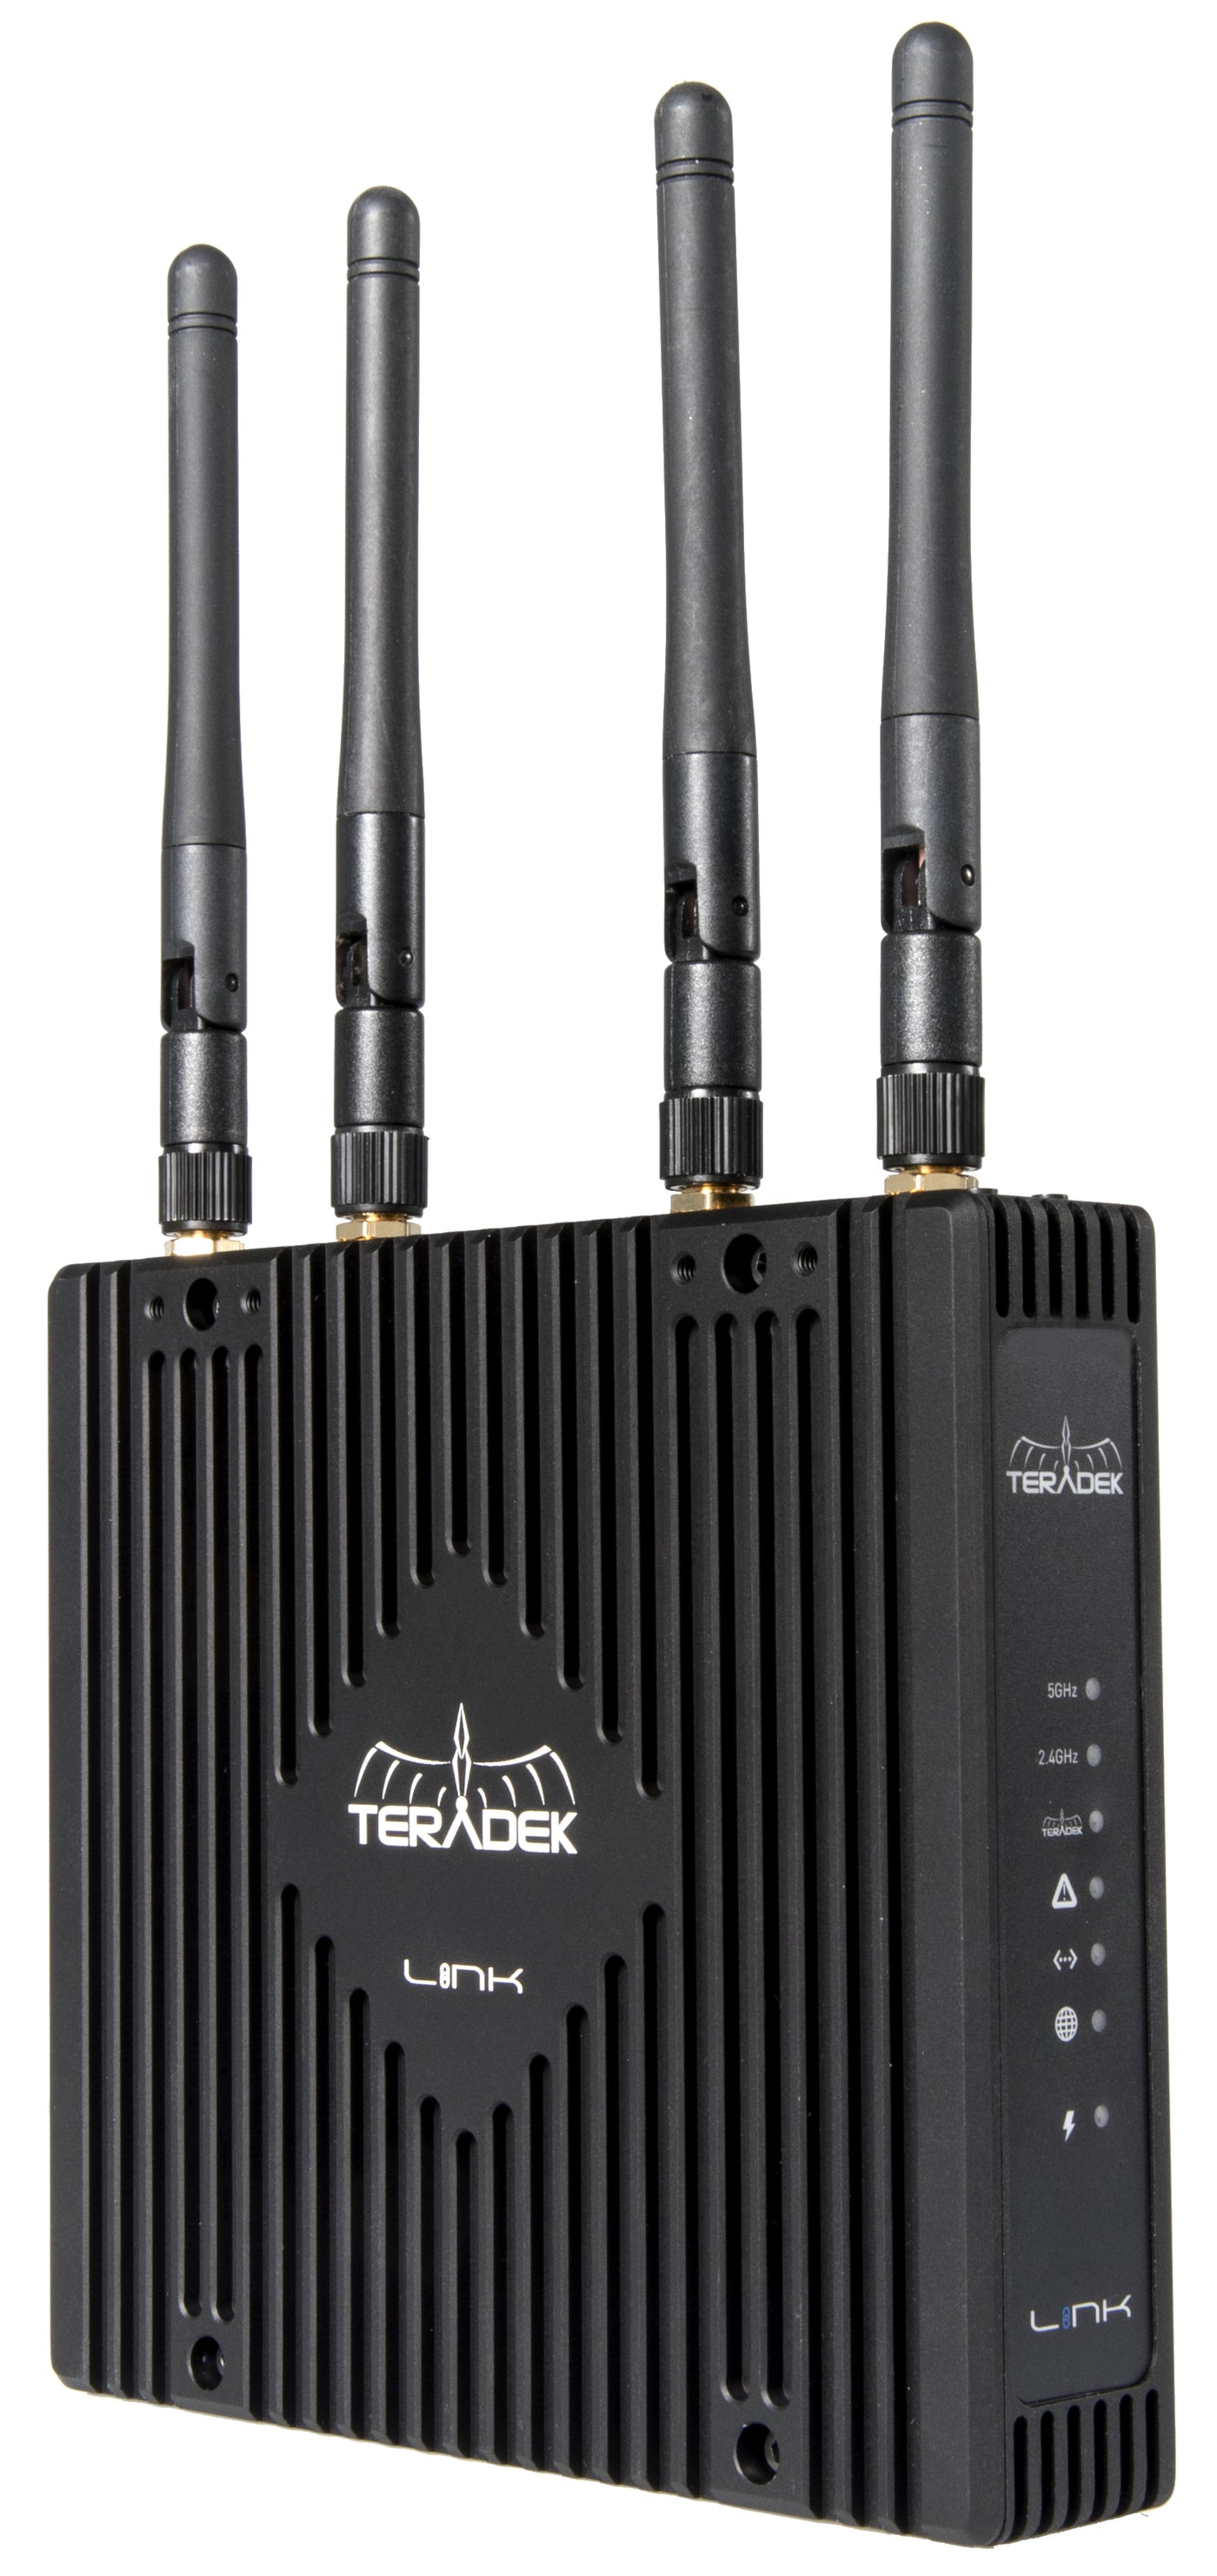 Teradek Link Dual Band Wireless Access Point / Router